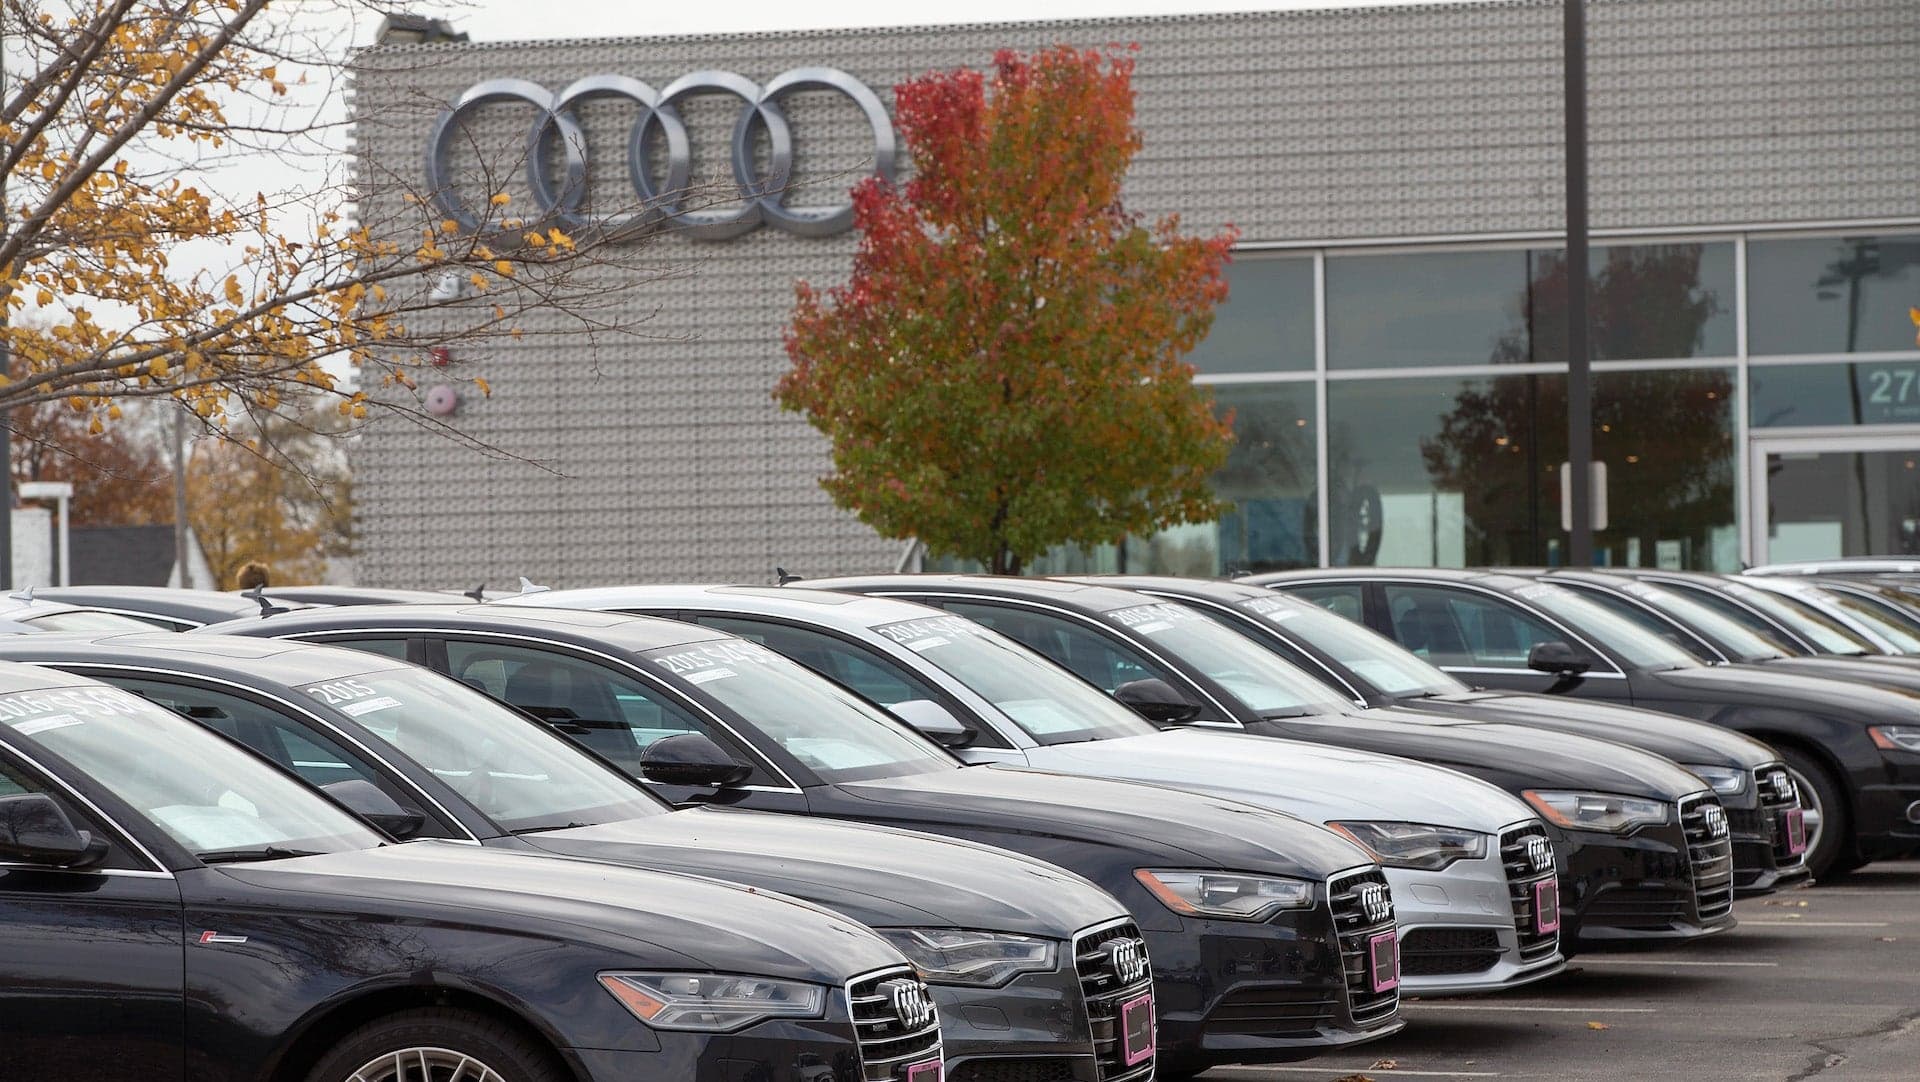 Parents Ordered to Pay Thousands to Dealer After Child Scratches 10 Brand-New Cars